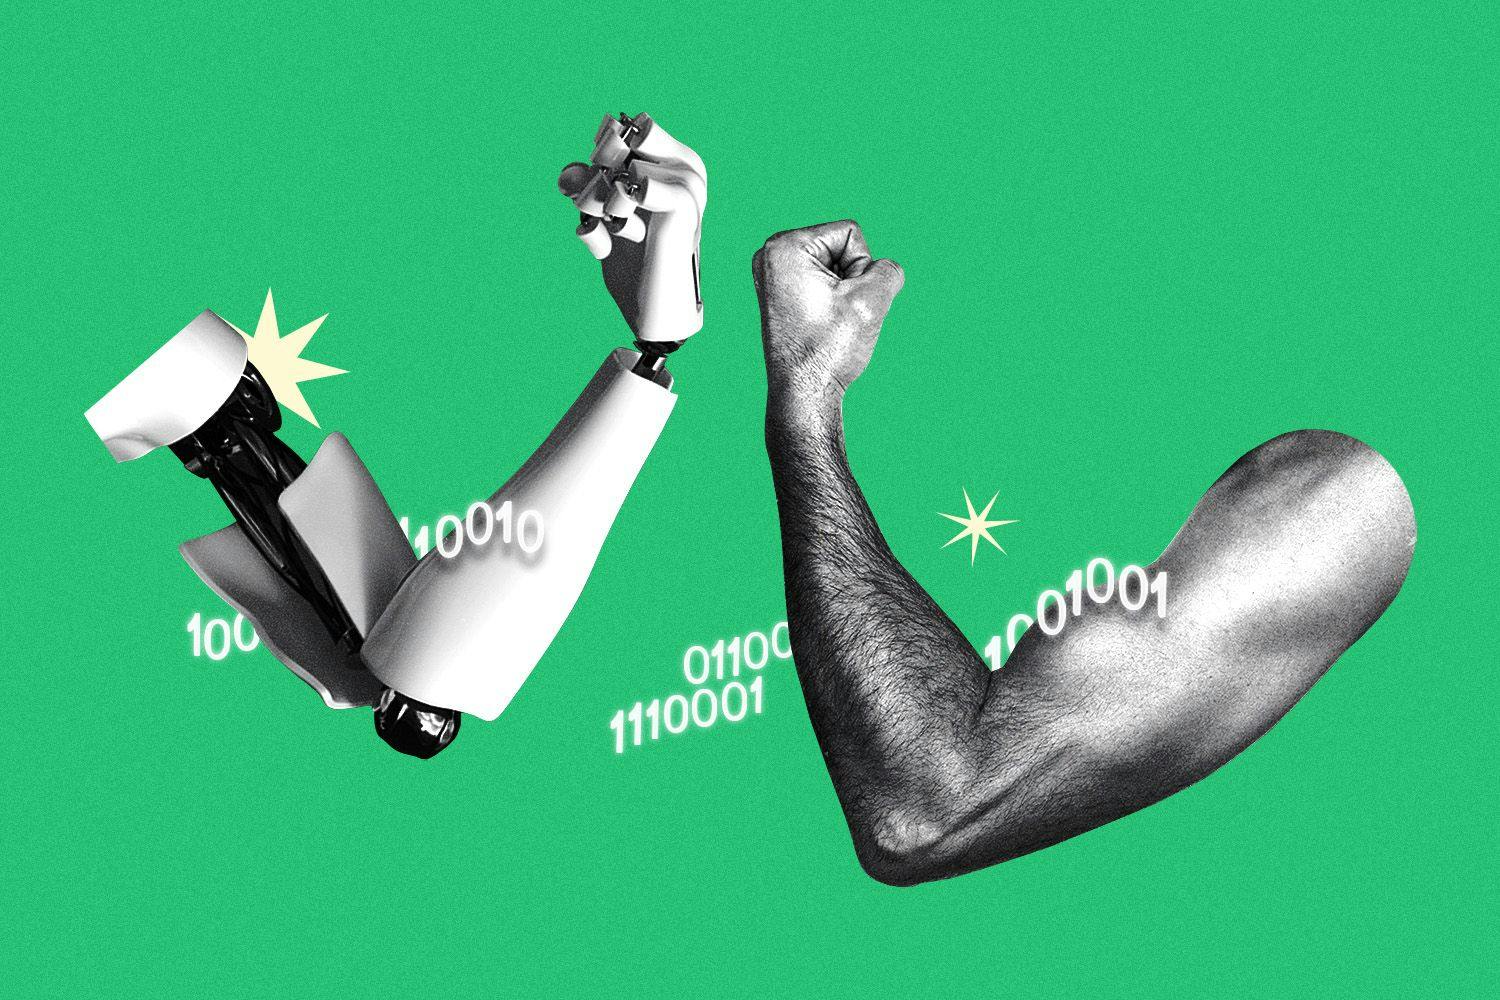 Binary code overlapping AI arm and human arm flexing